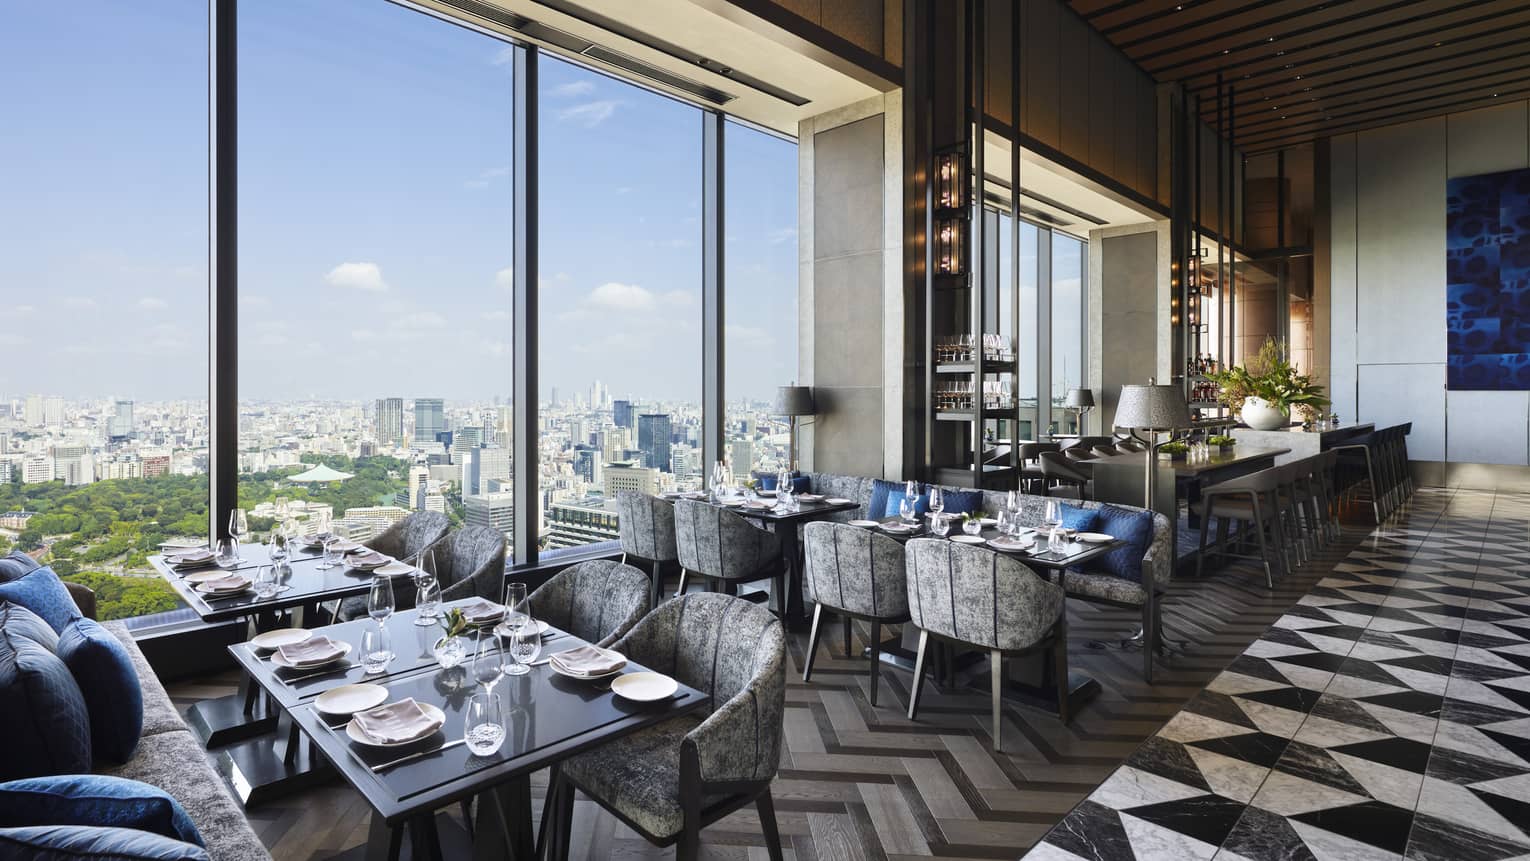 Four tables set for four with floor-to-ceiling windows, view of the city, natural light, grey and black colour scheme